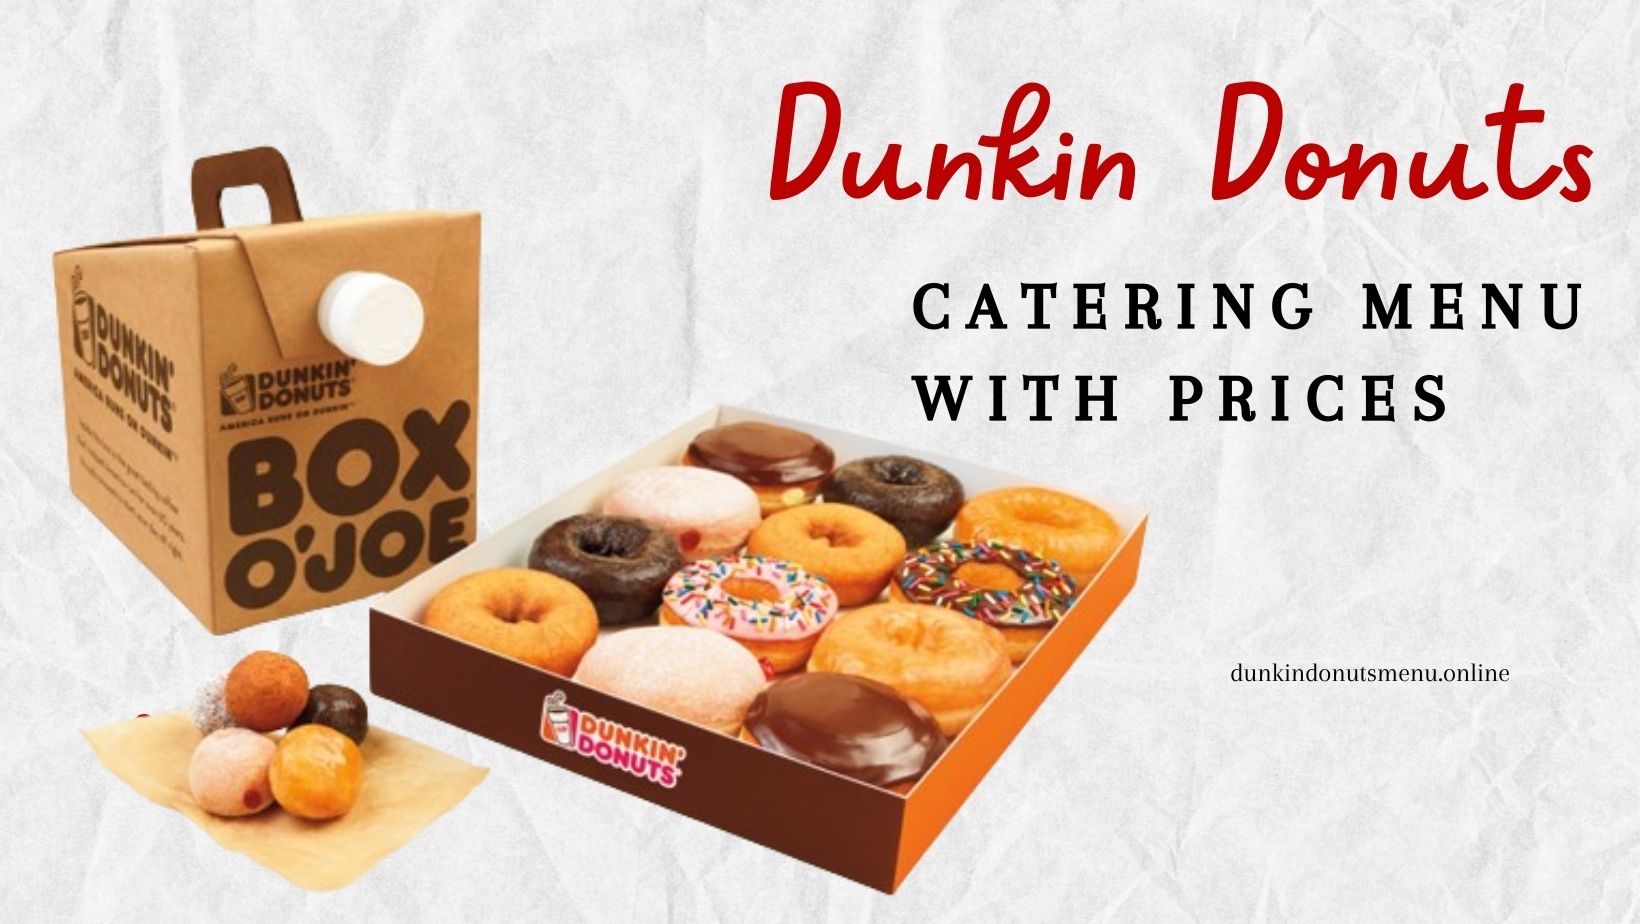 Dunkin Donuts Catering Menu With Prices